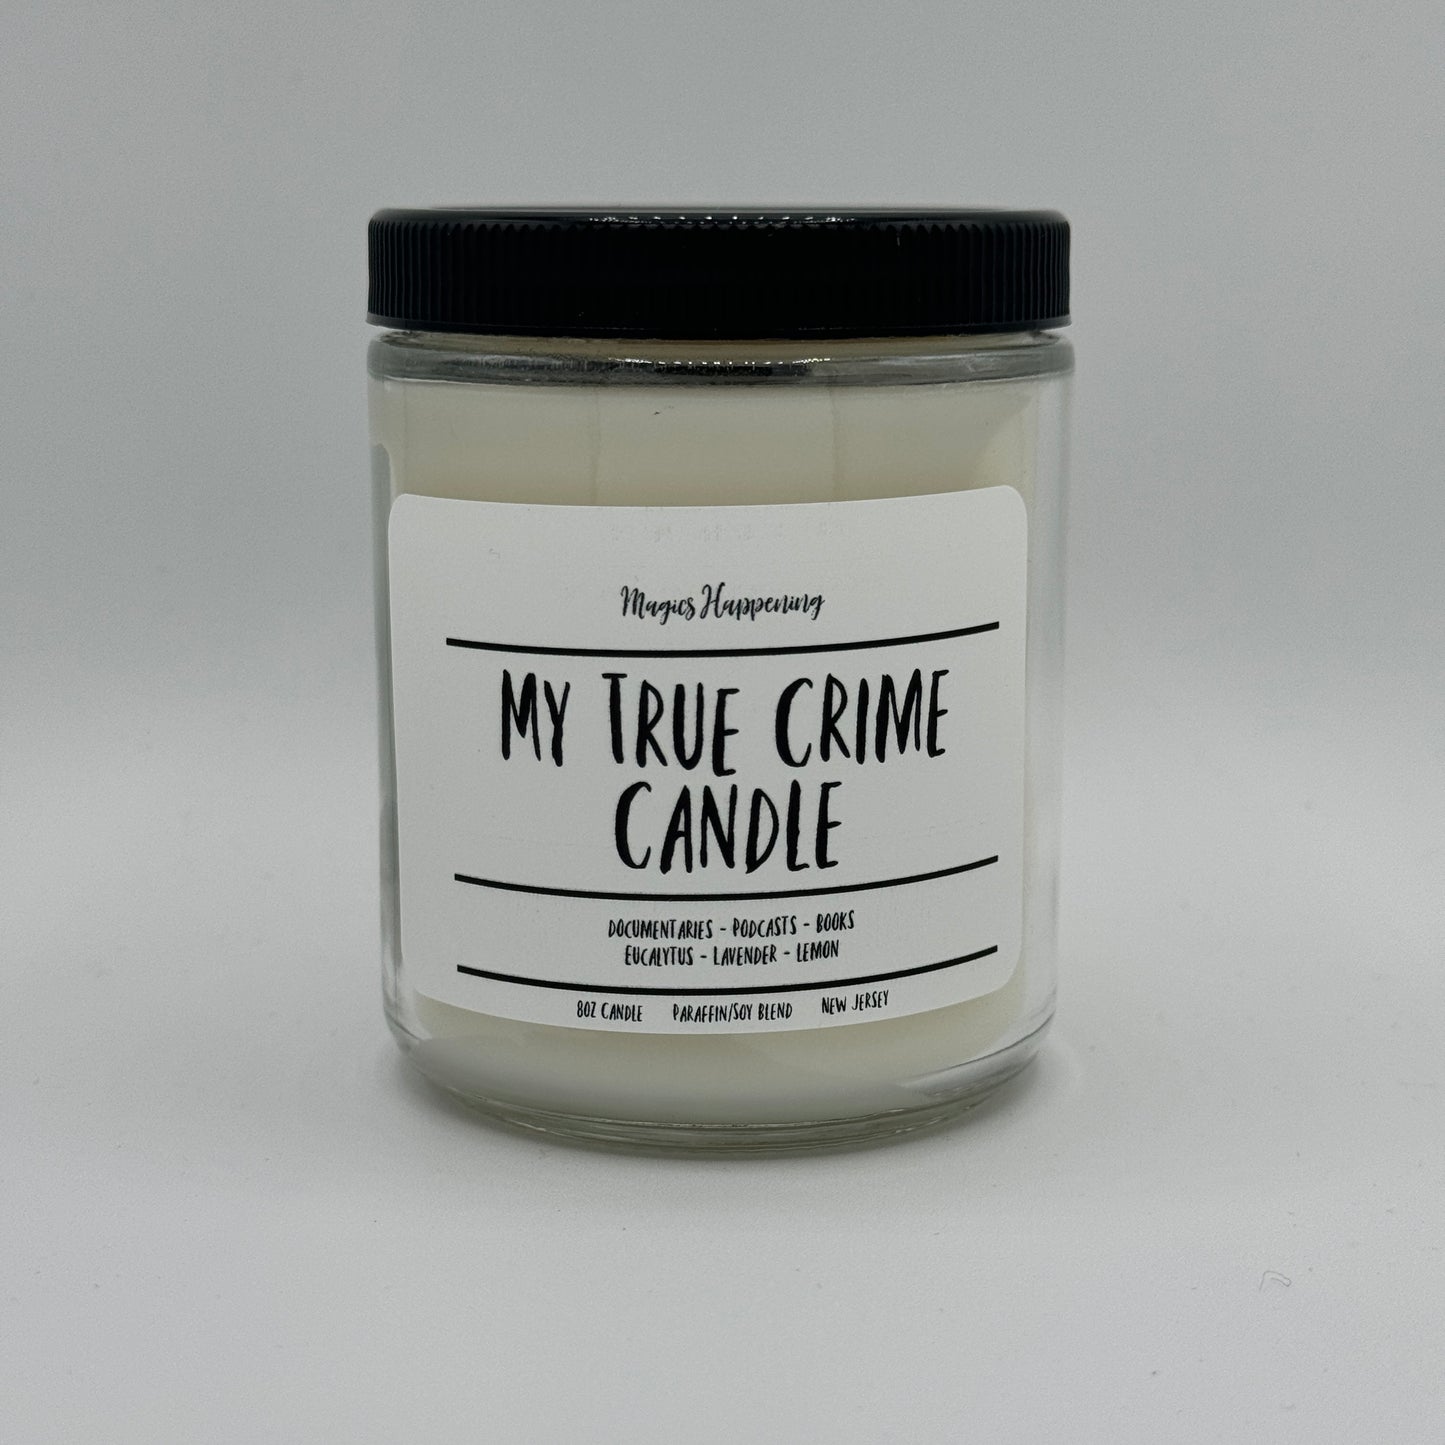 My True Crime Candle